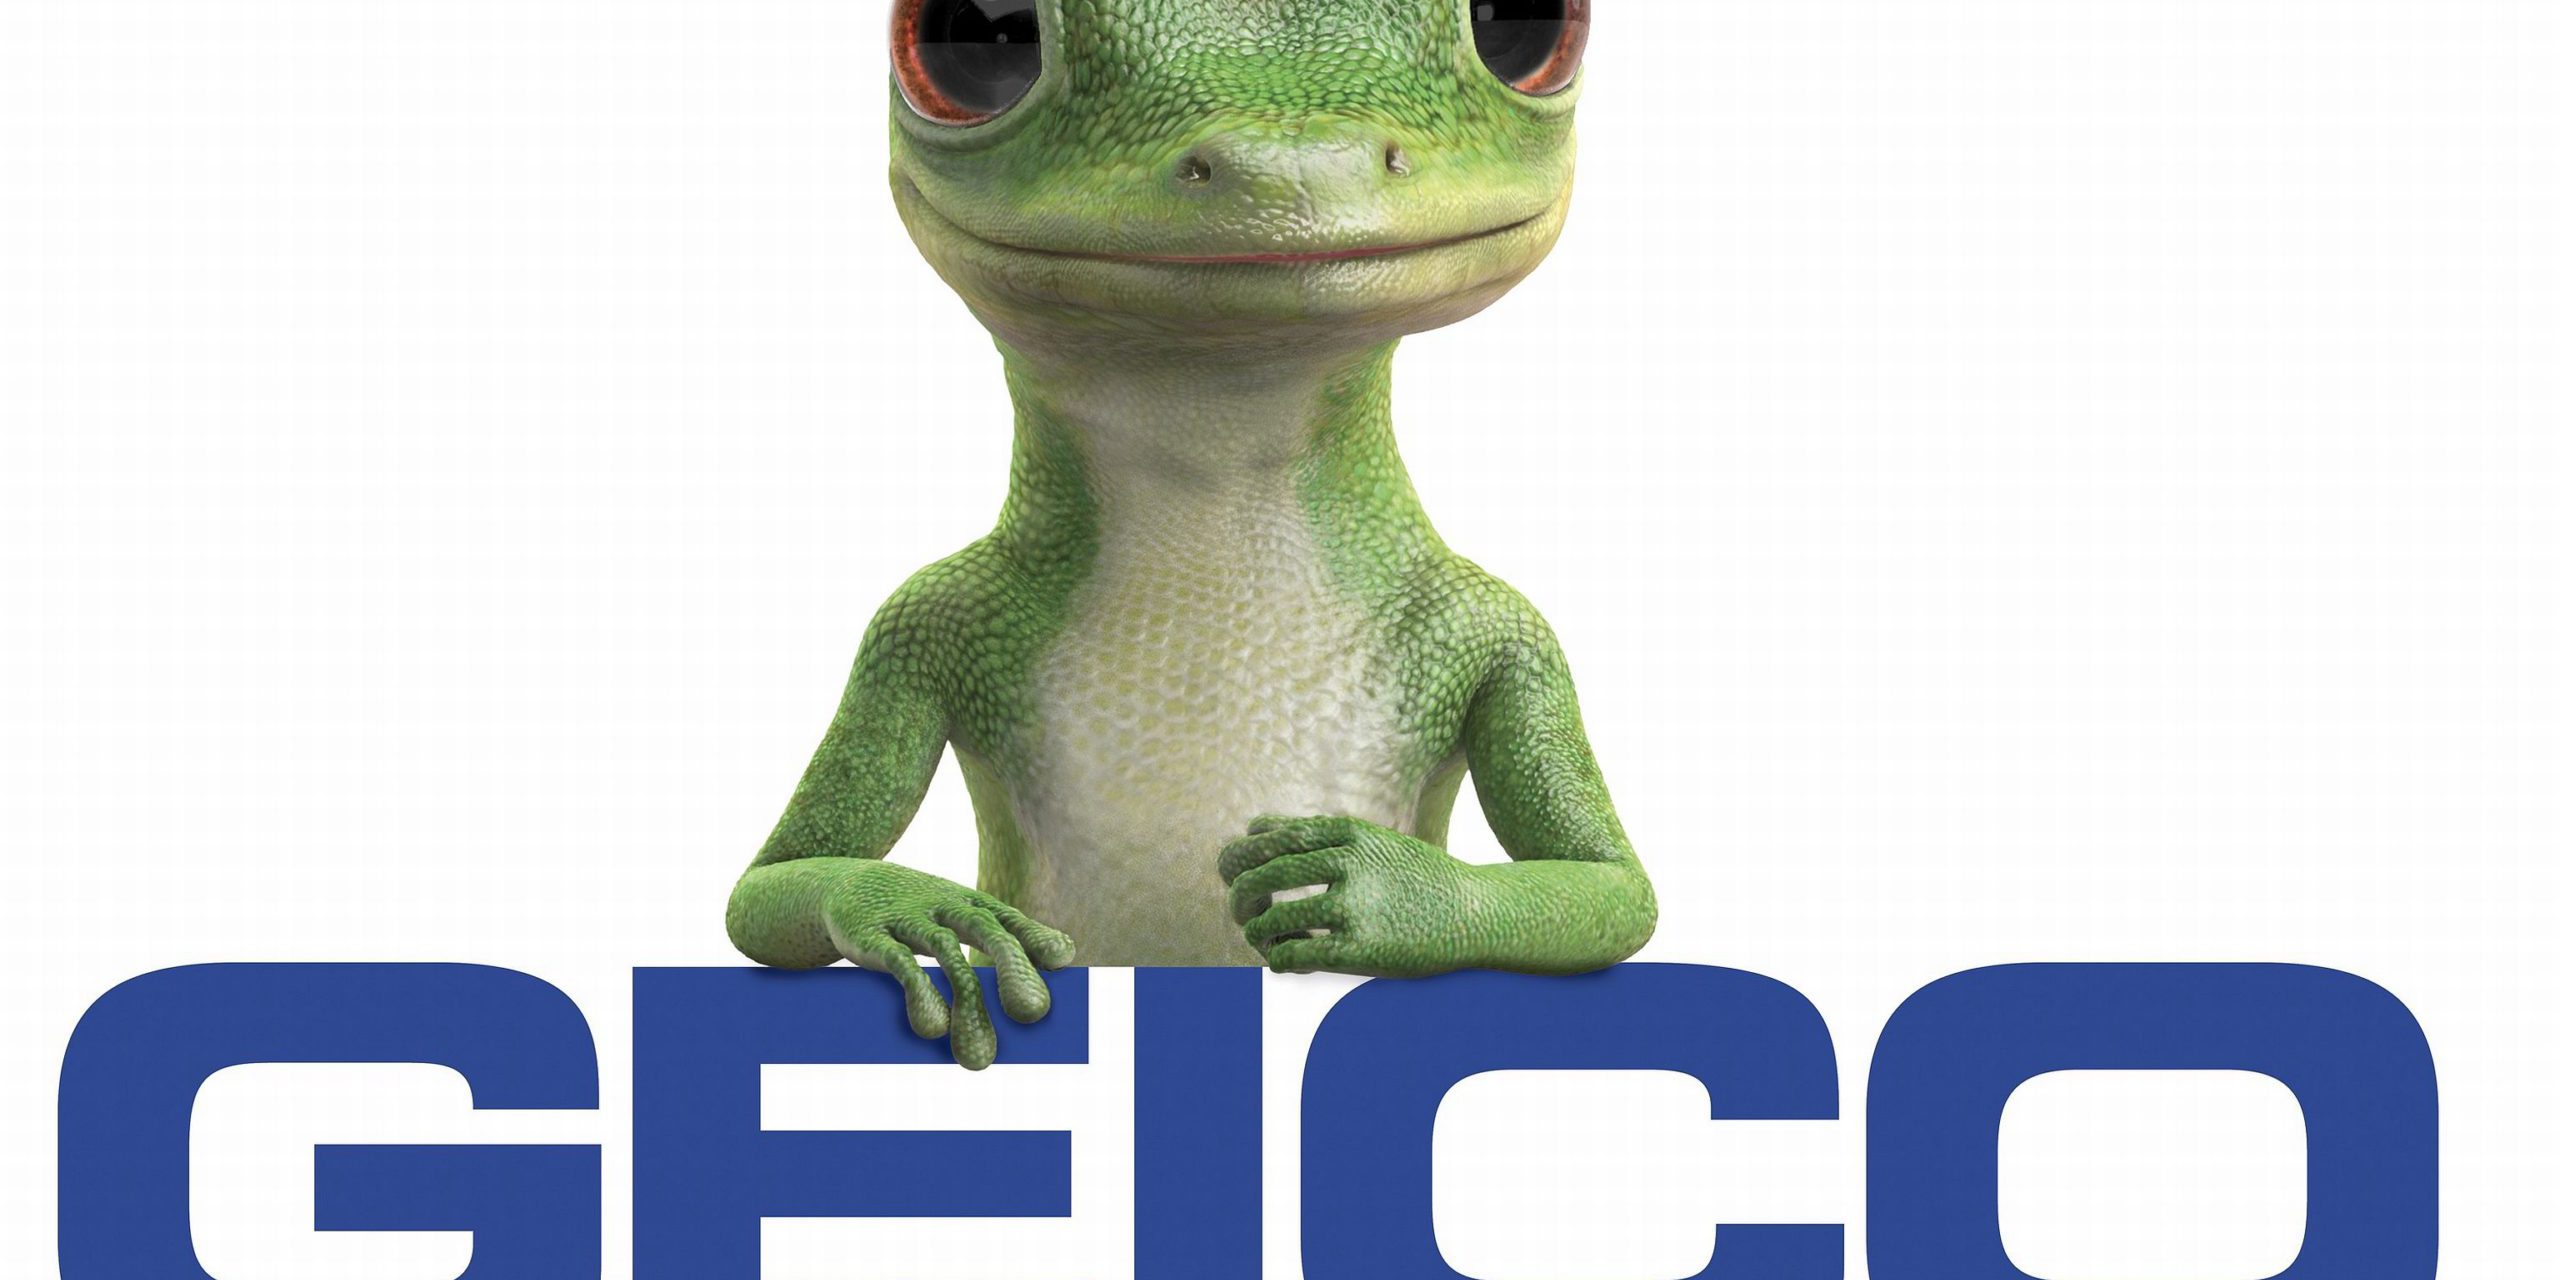 Geico data breach exposed customers’ driver’s license numbers Long